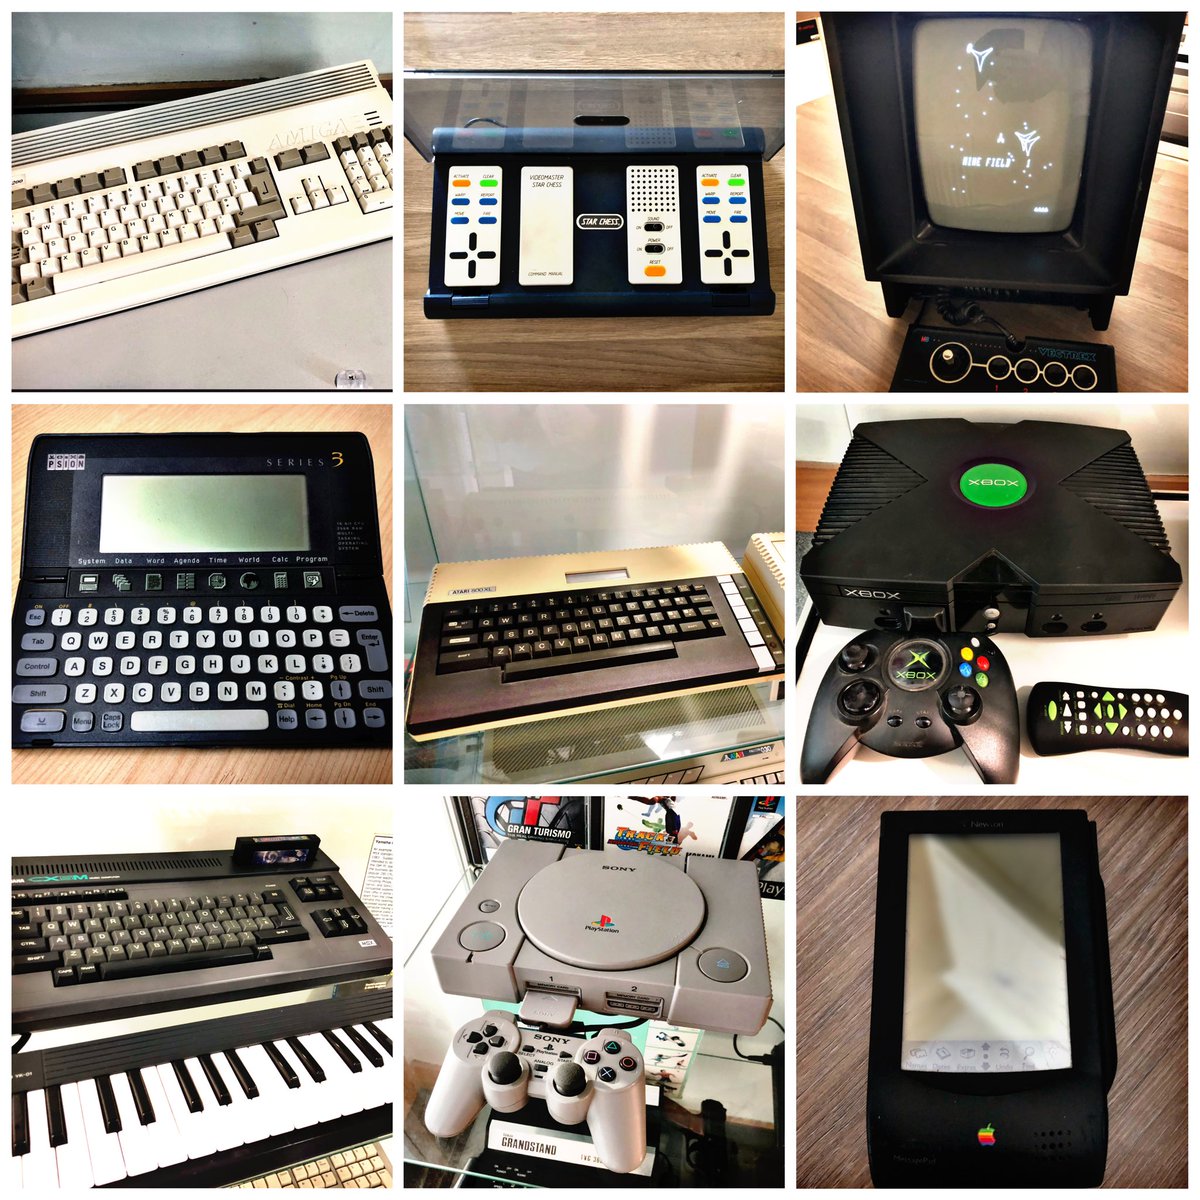 This week’s #RetroEnnead offers you the #A1200, #StarChess, #Vectrex, #Series3, #800XL, #Xbox, #CX5M, #PlayStation and #MessagePad.  Pick a line of 3 and dump the rest! #RetroComputing #ComputerHistory #RetroGaming #VideoGames